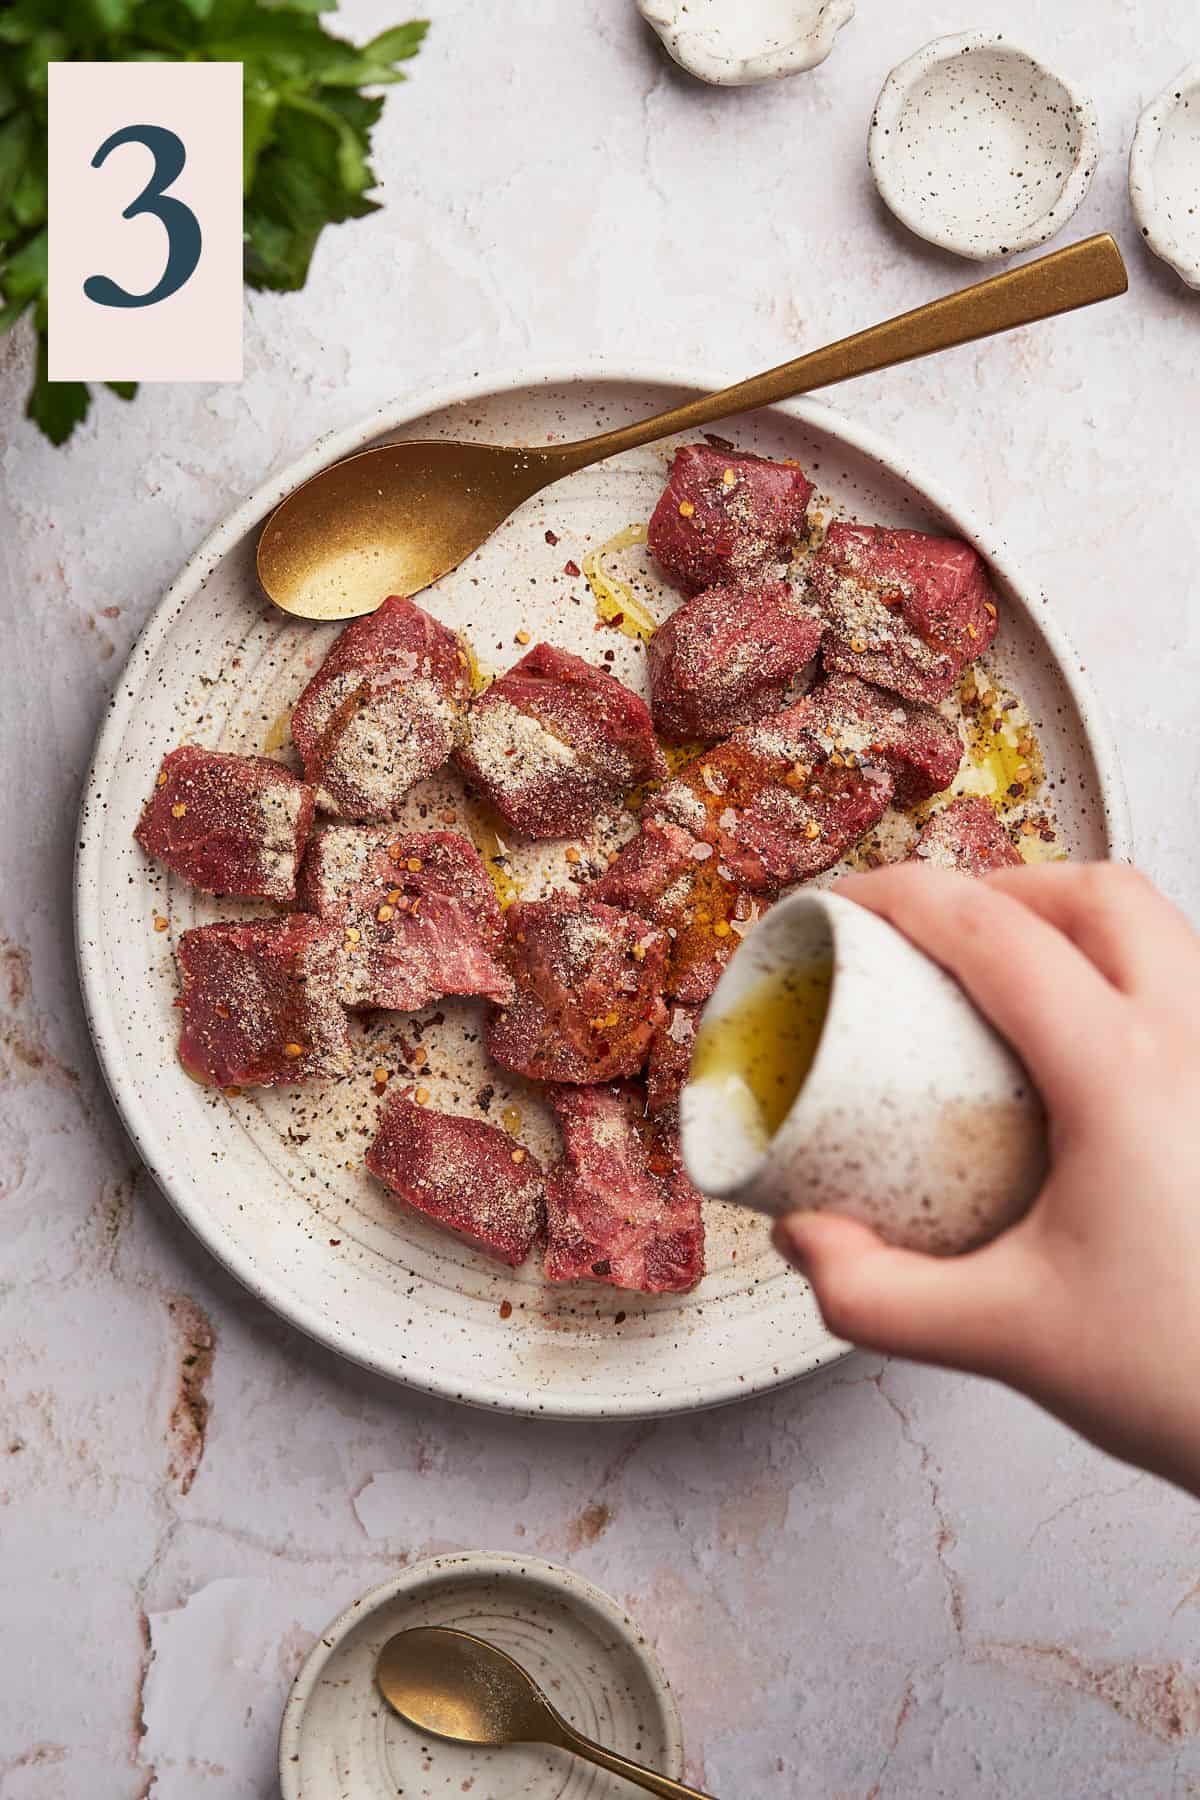 Coating steak in olive oil to fry better.